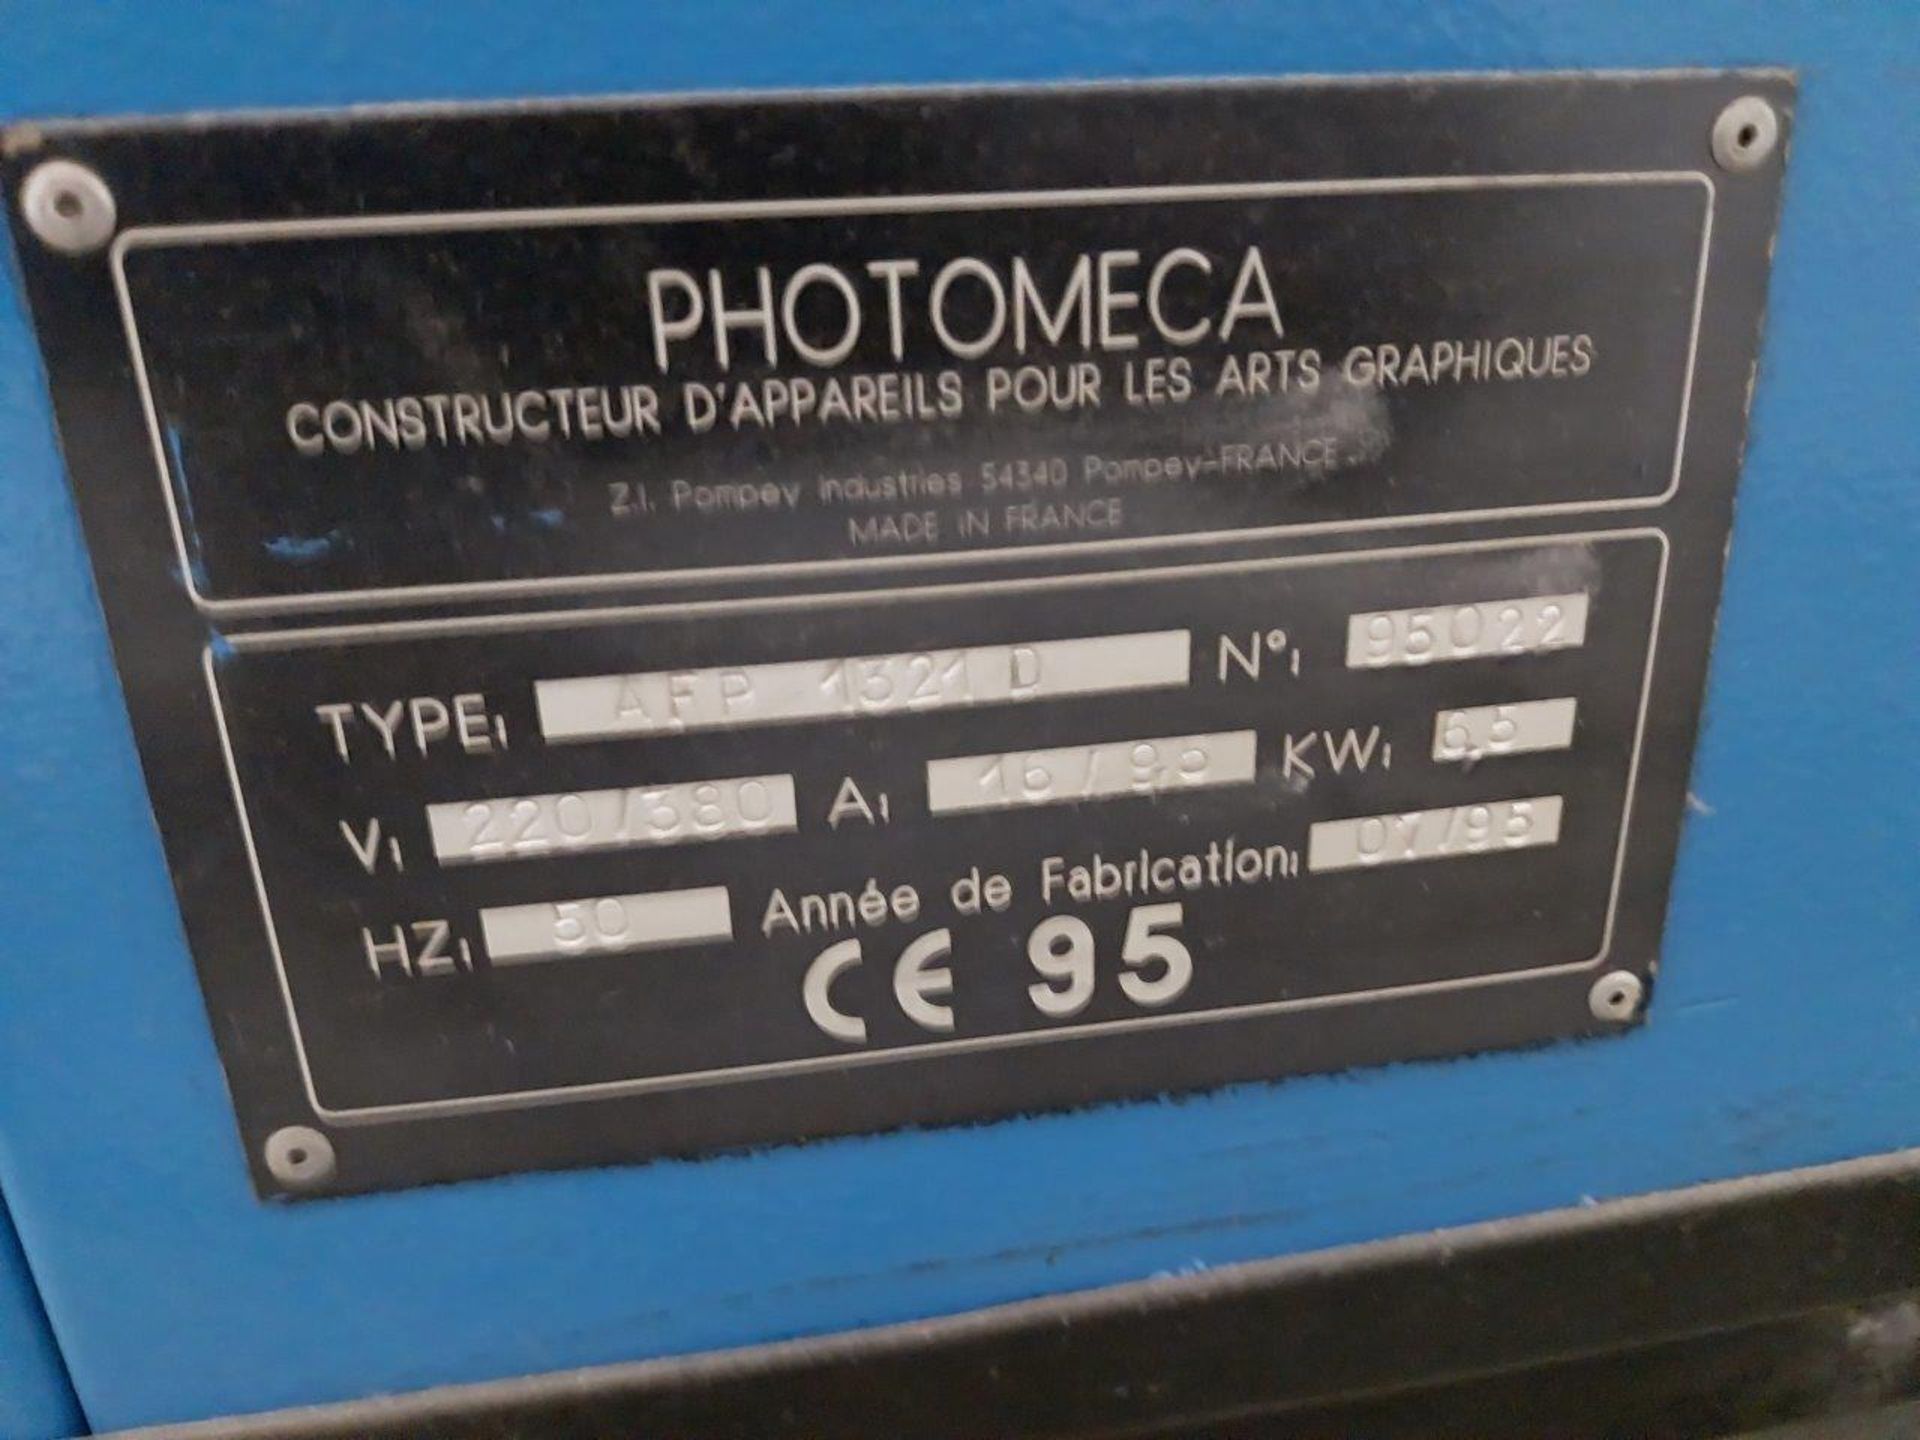 Photomeca AFP1321D 5 drawer drying unit, Serial number 95022, kw:6.5, Mfr date 07/95 - Image 4 of 4